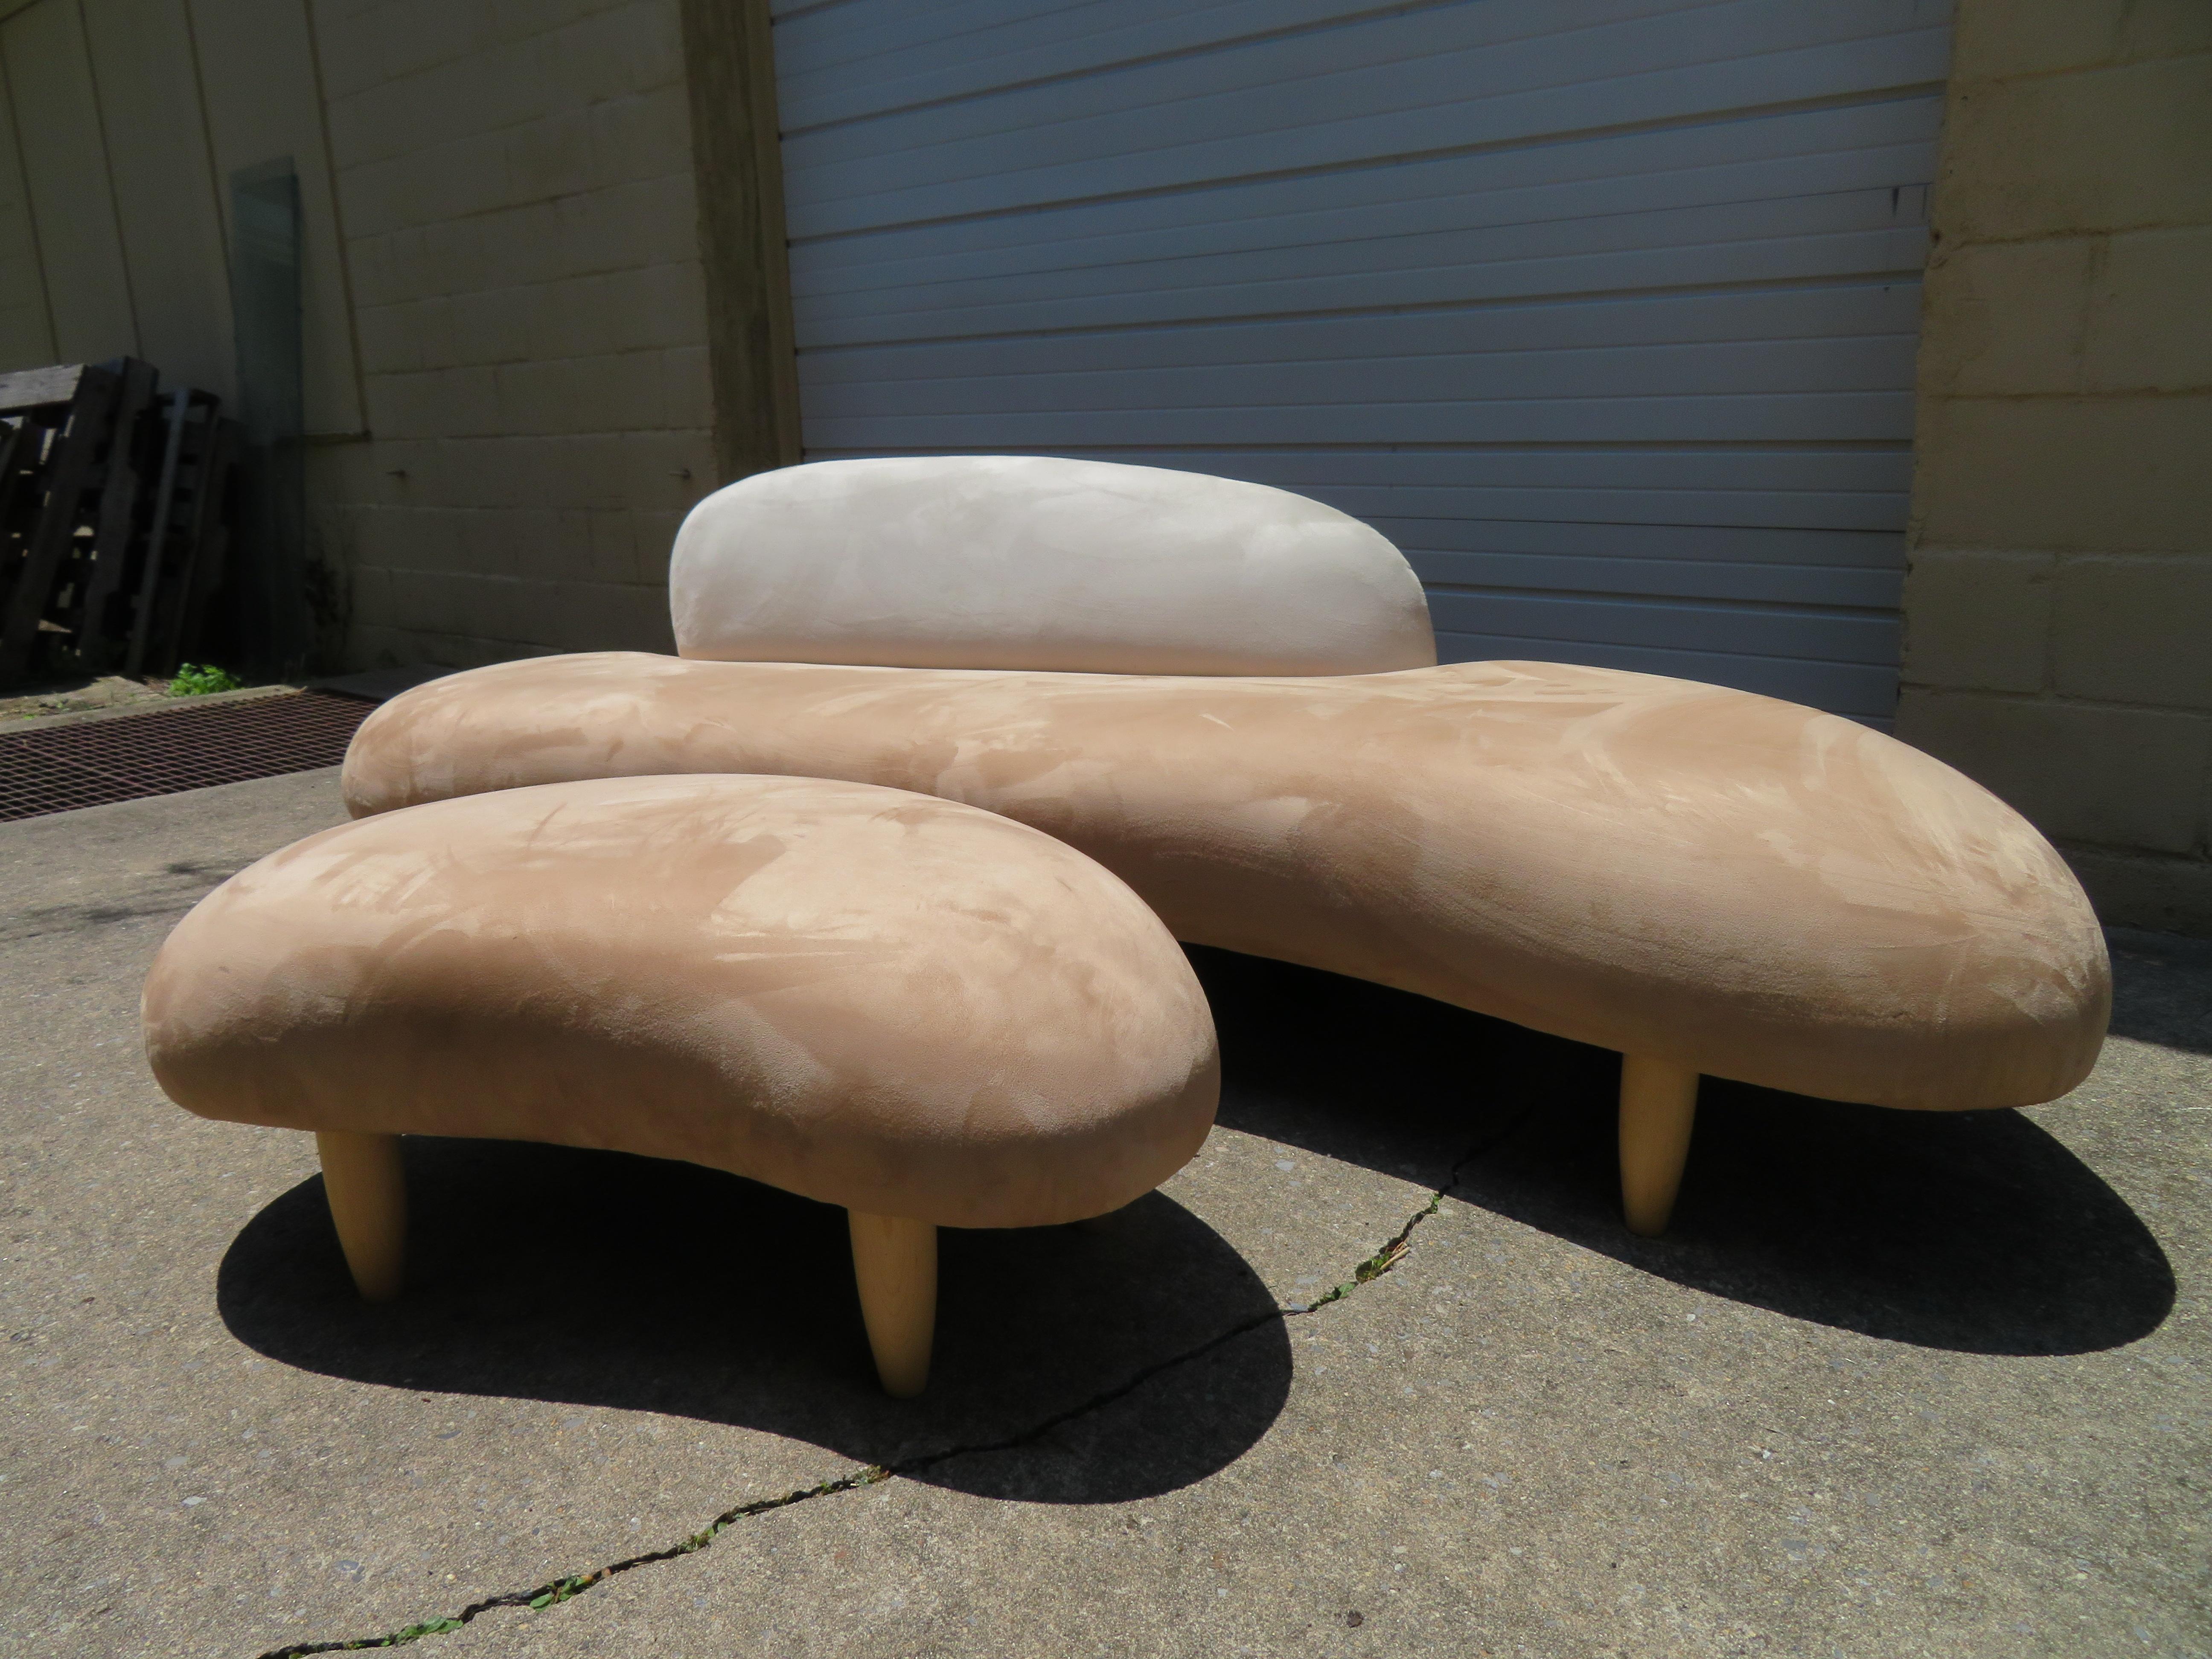 Gorgeous Noguchi style freeform cloud sofa and ottoman. This sofa set is a vintage reproduction of the original from the 1990s. The sculptural quality of Noguchi's design vocabulary finds expression in the free-form sofa: it is entirely different